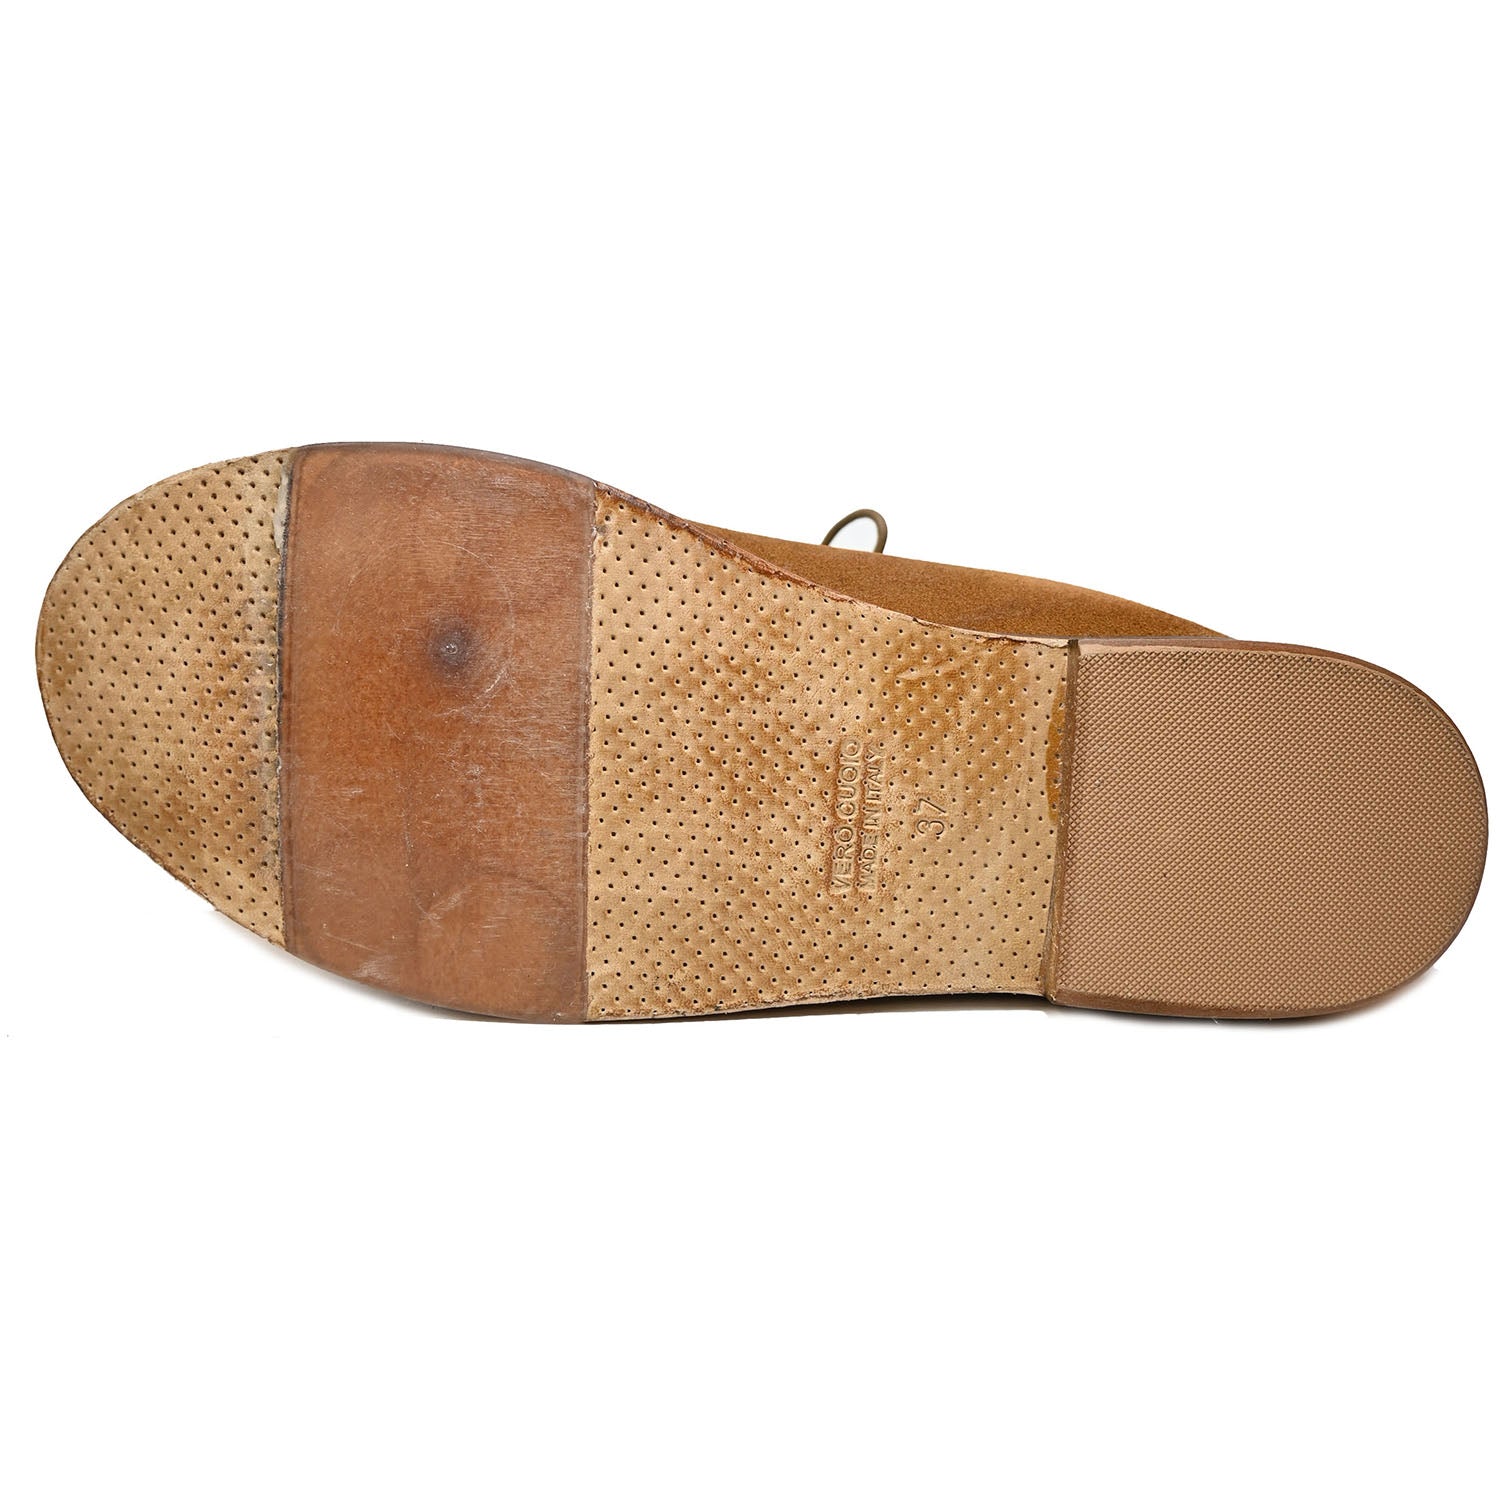 SALLY 16 - mid-season lace-up shoe suede CARAMEL - History541